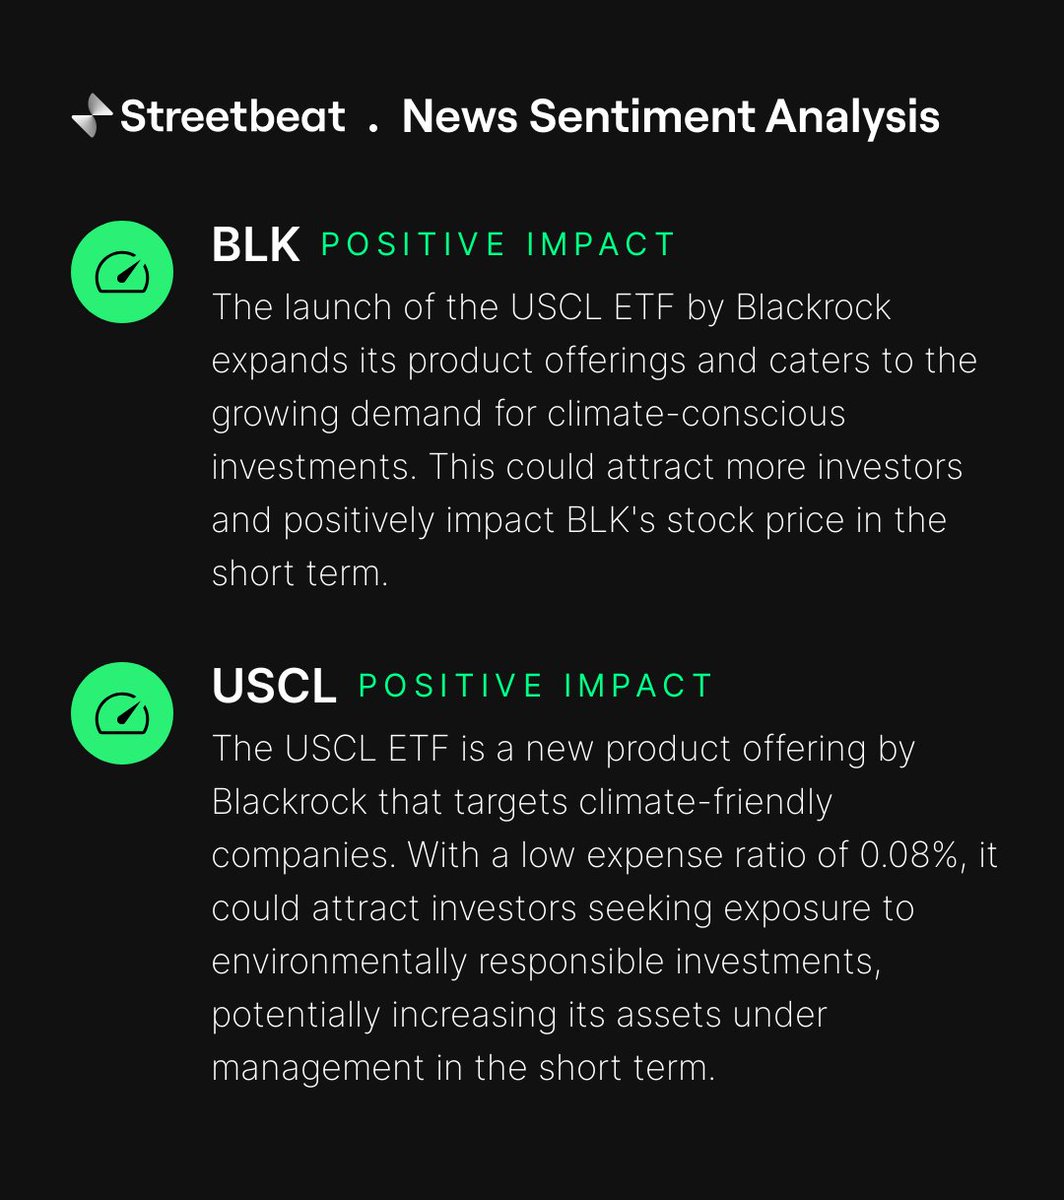 Blackrock launches iShares Climate Conscious & Transition MSCI USA ETF (USCL) targeting climate-friendly companies. #ETF #ClimateInvesting #positive